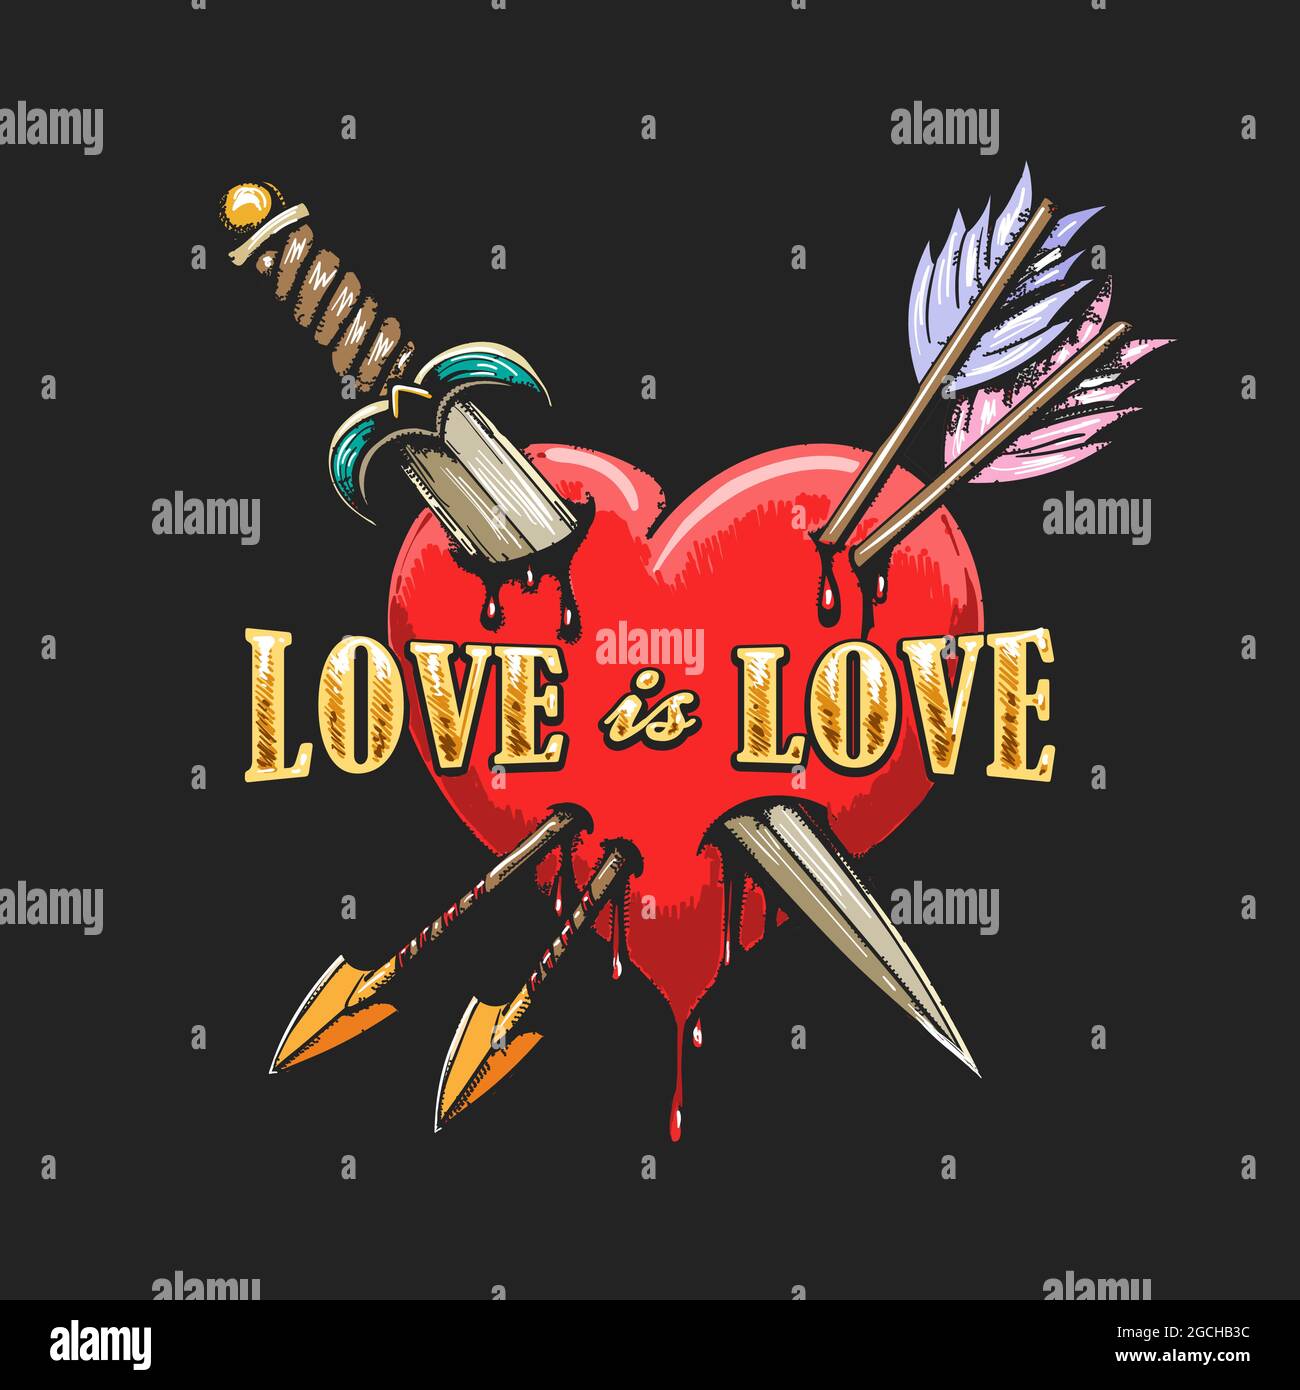 Tattoo of Heart Pierced by Dagger and Arrows and Wording Love is love on black background. Vector Illustration. Stock Vector